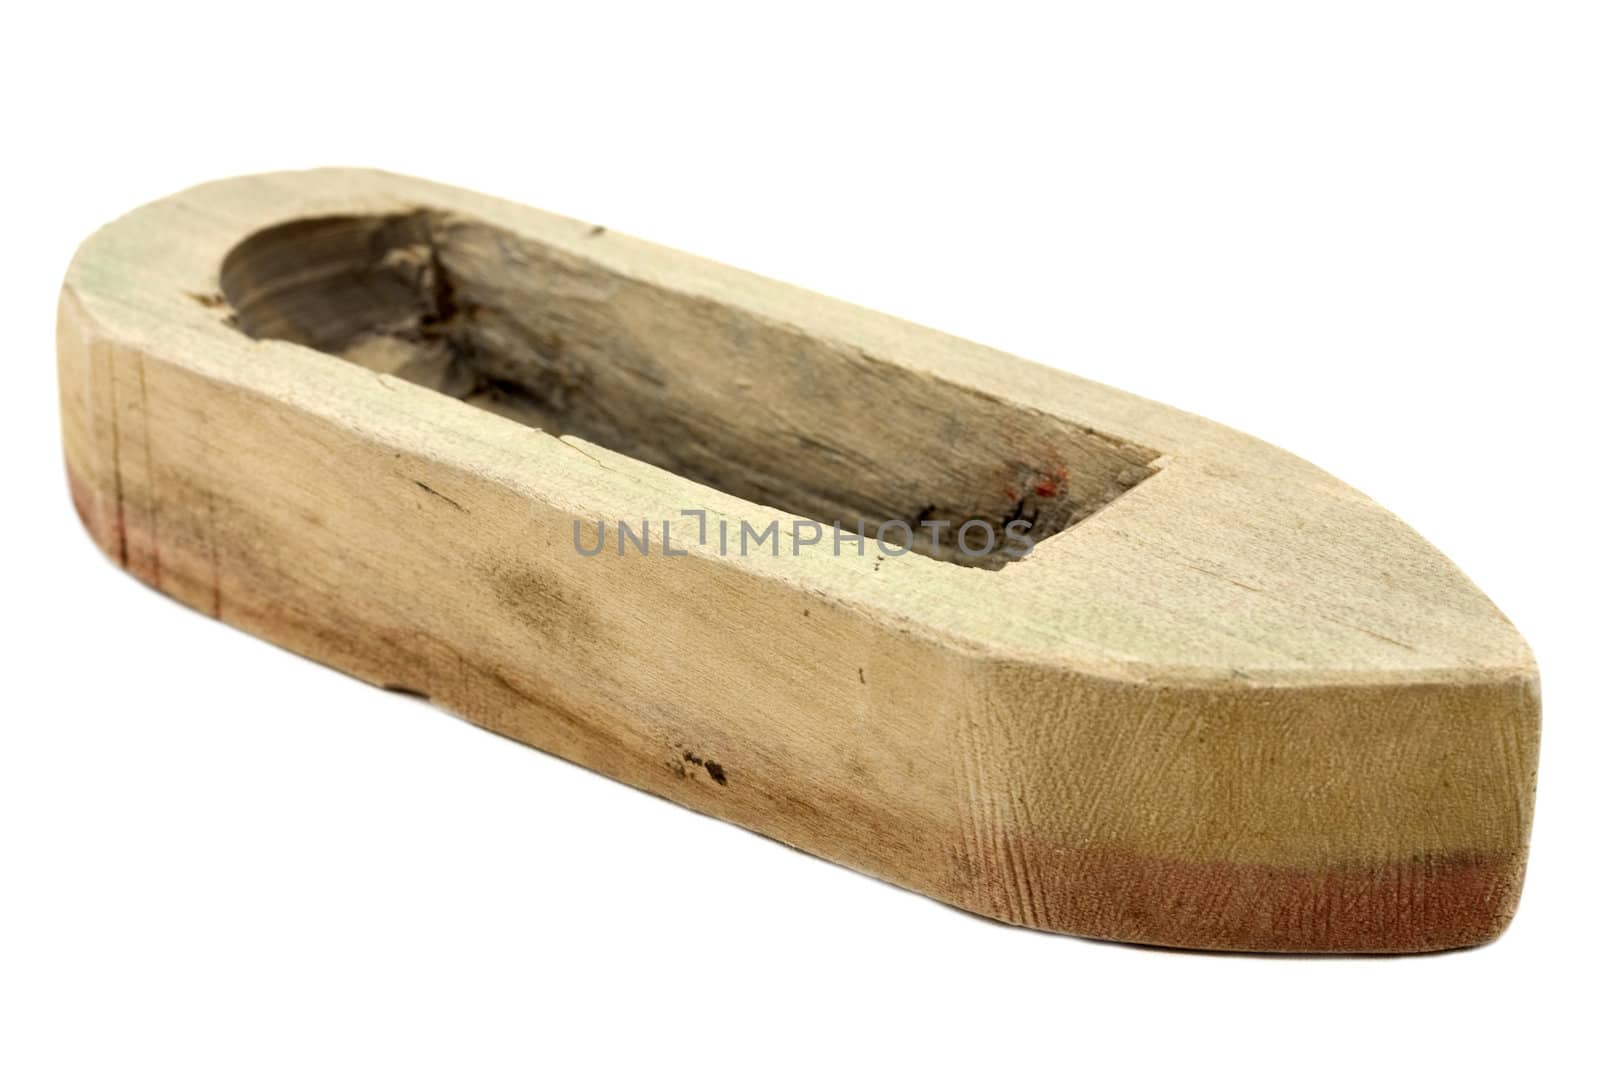 Old simple little homemade wooden toy boat